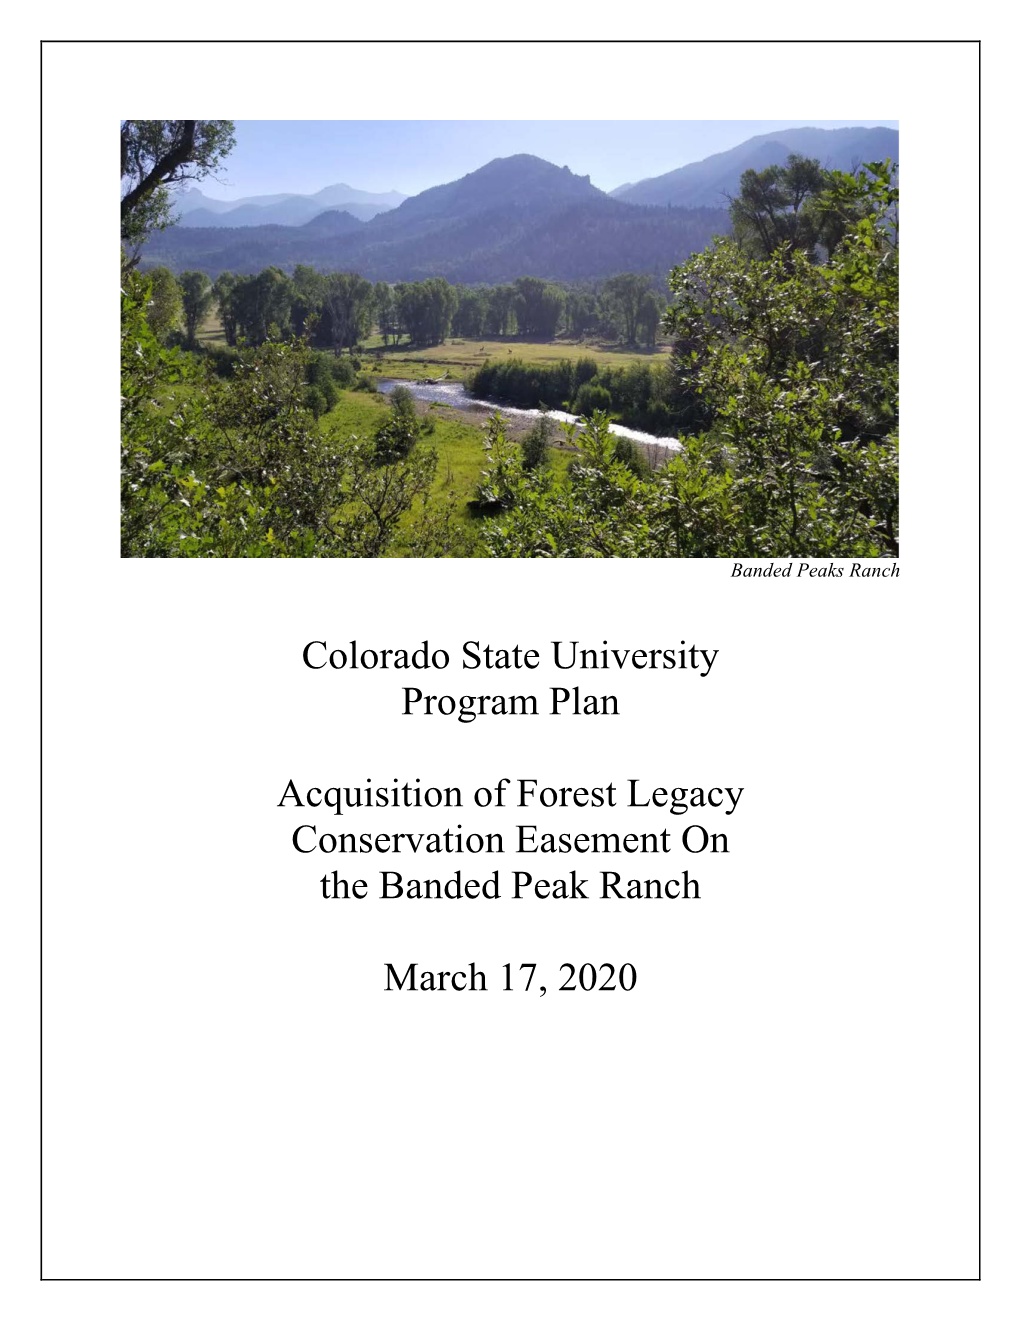 Colorado State University Program Plan Acquisition of Forest Legacy